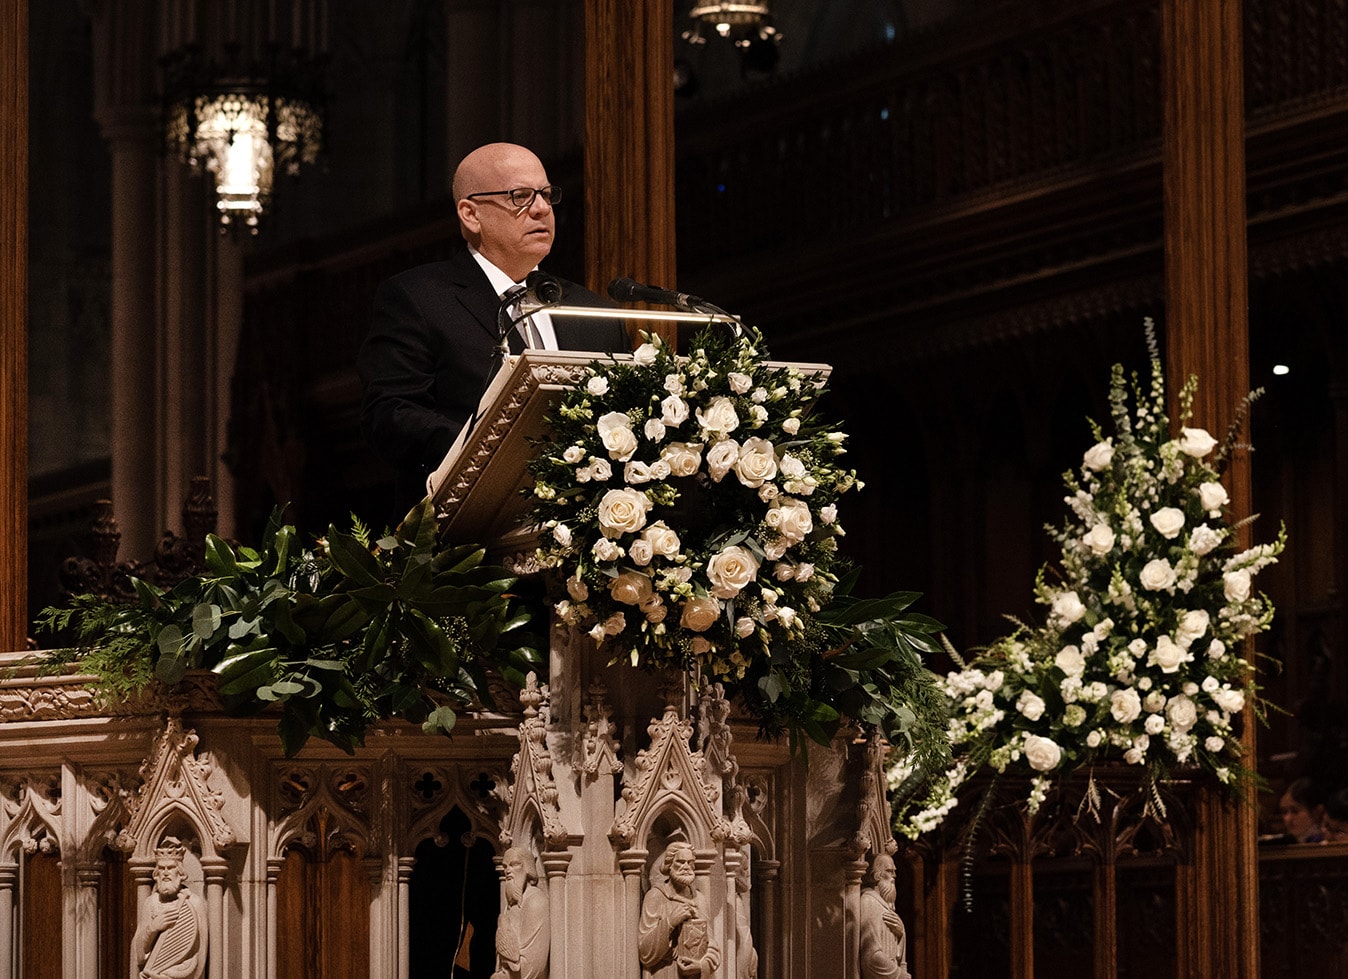 Jay O’Connor, Justice O’Connor’s youngest son, talks about his mom at the National Cathedral